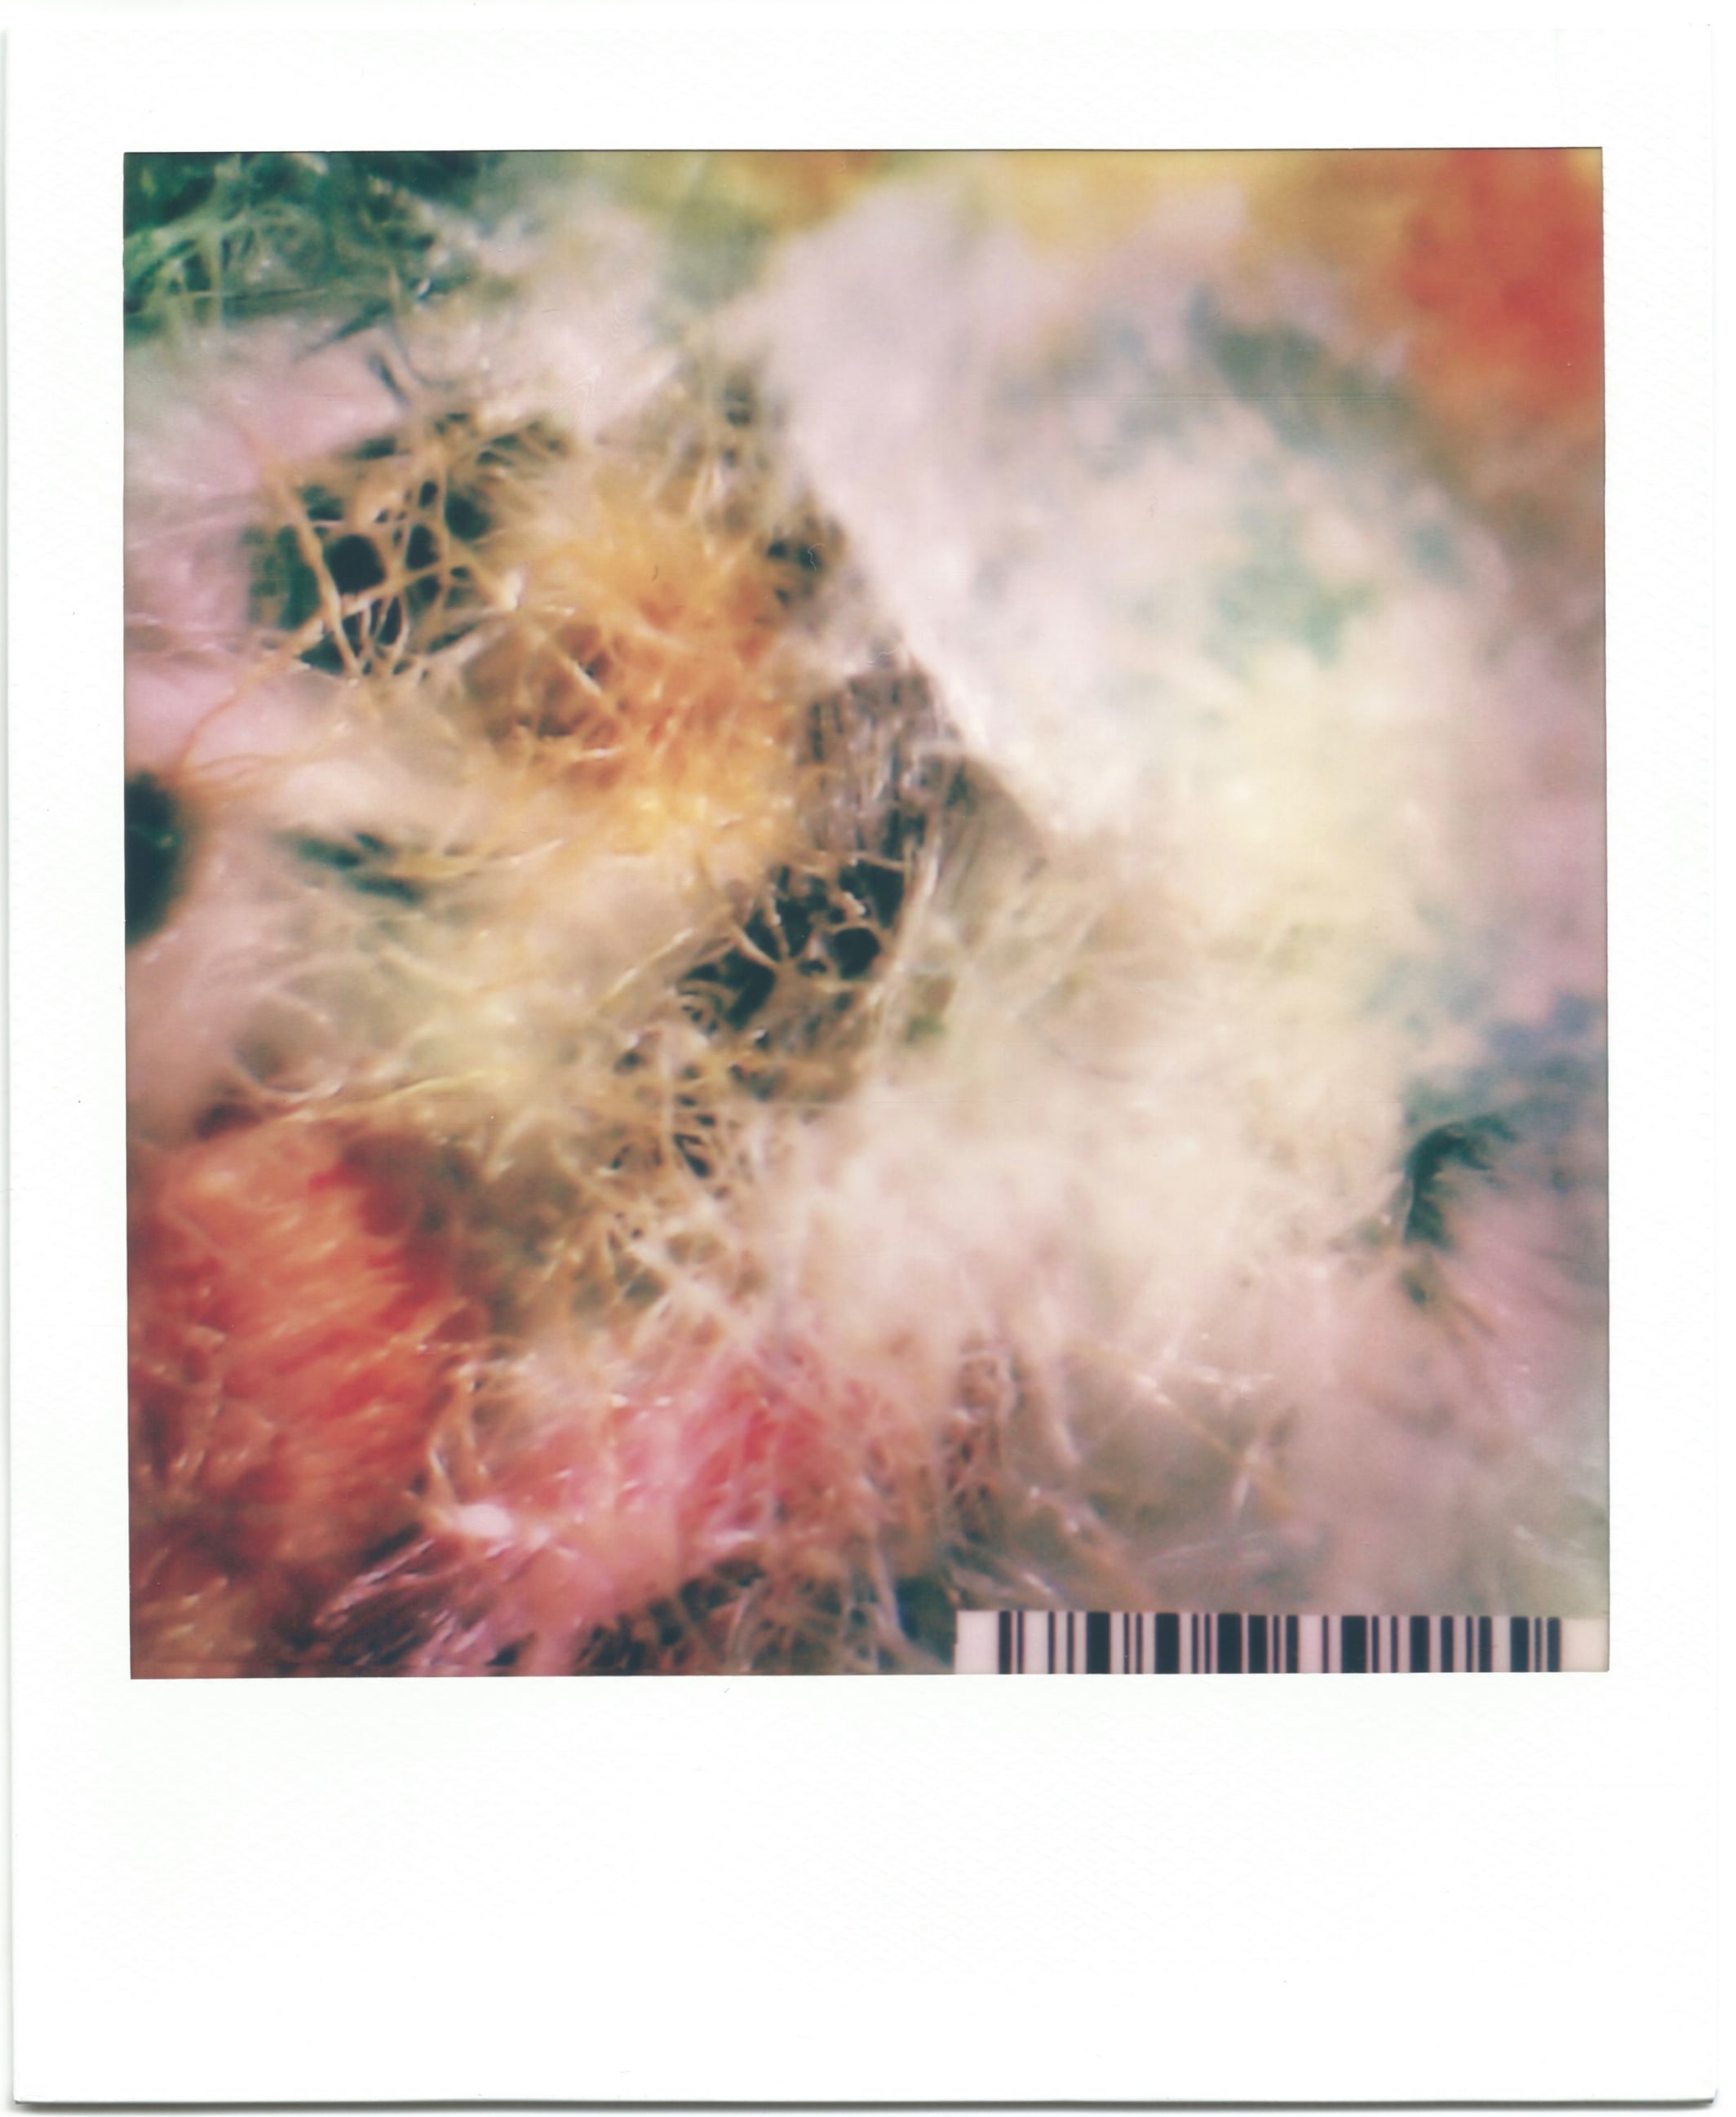 A portrait polaroid image containing a close up of different coloured fabric fibres.